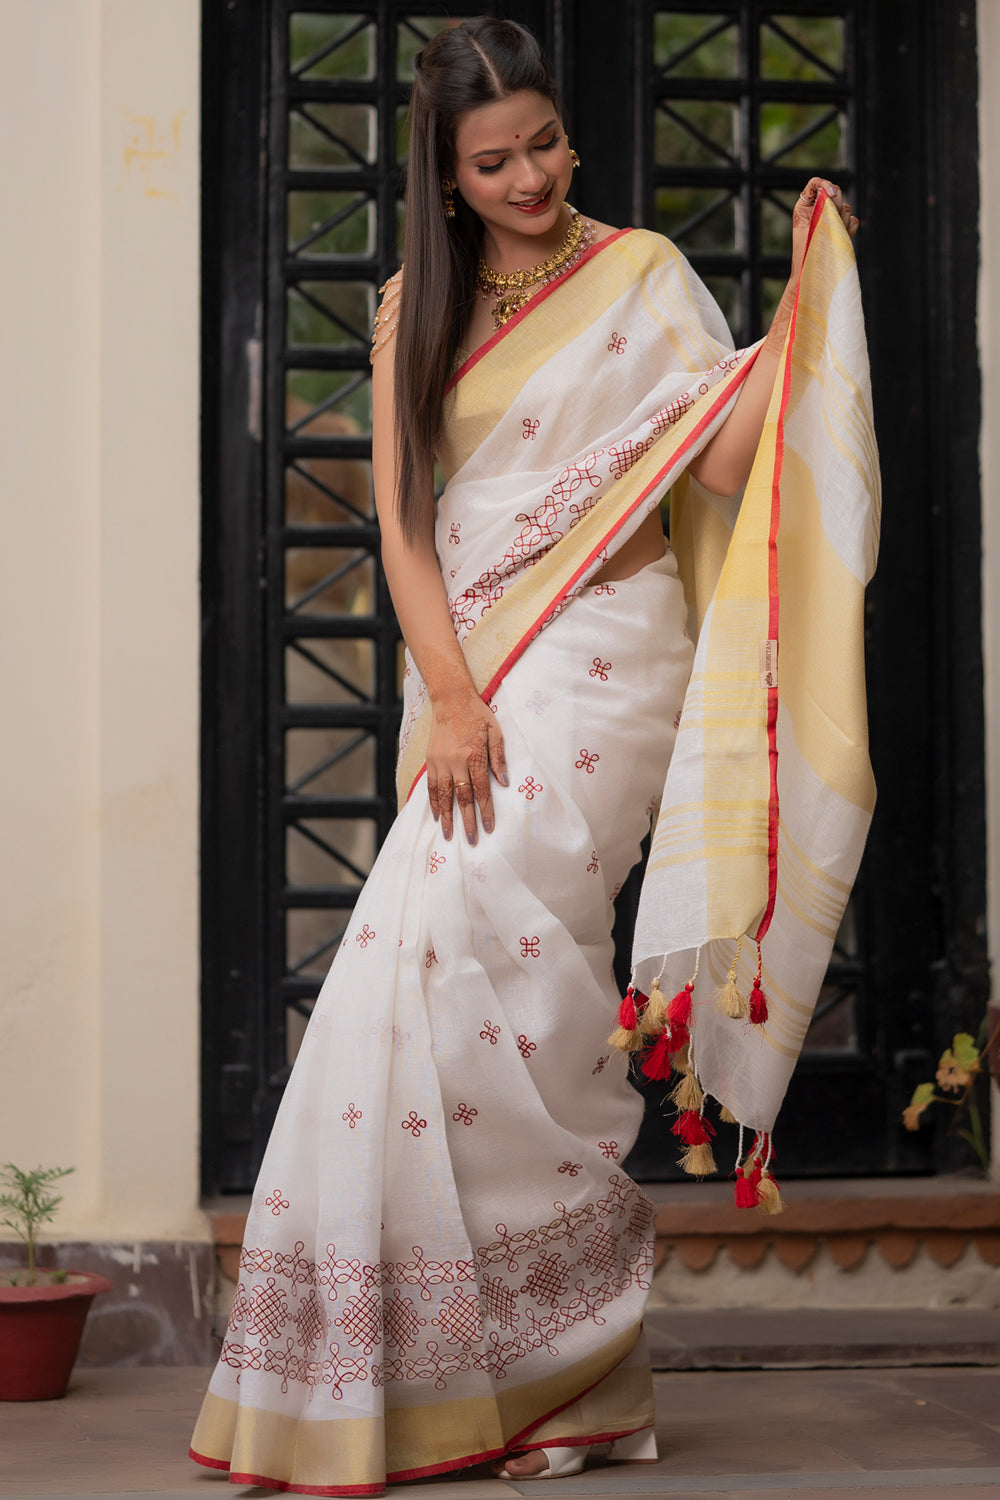 Rangoli Embroidered Border on Pure Linen Saree in White, Red and Gold